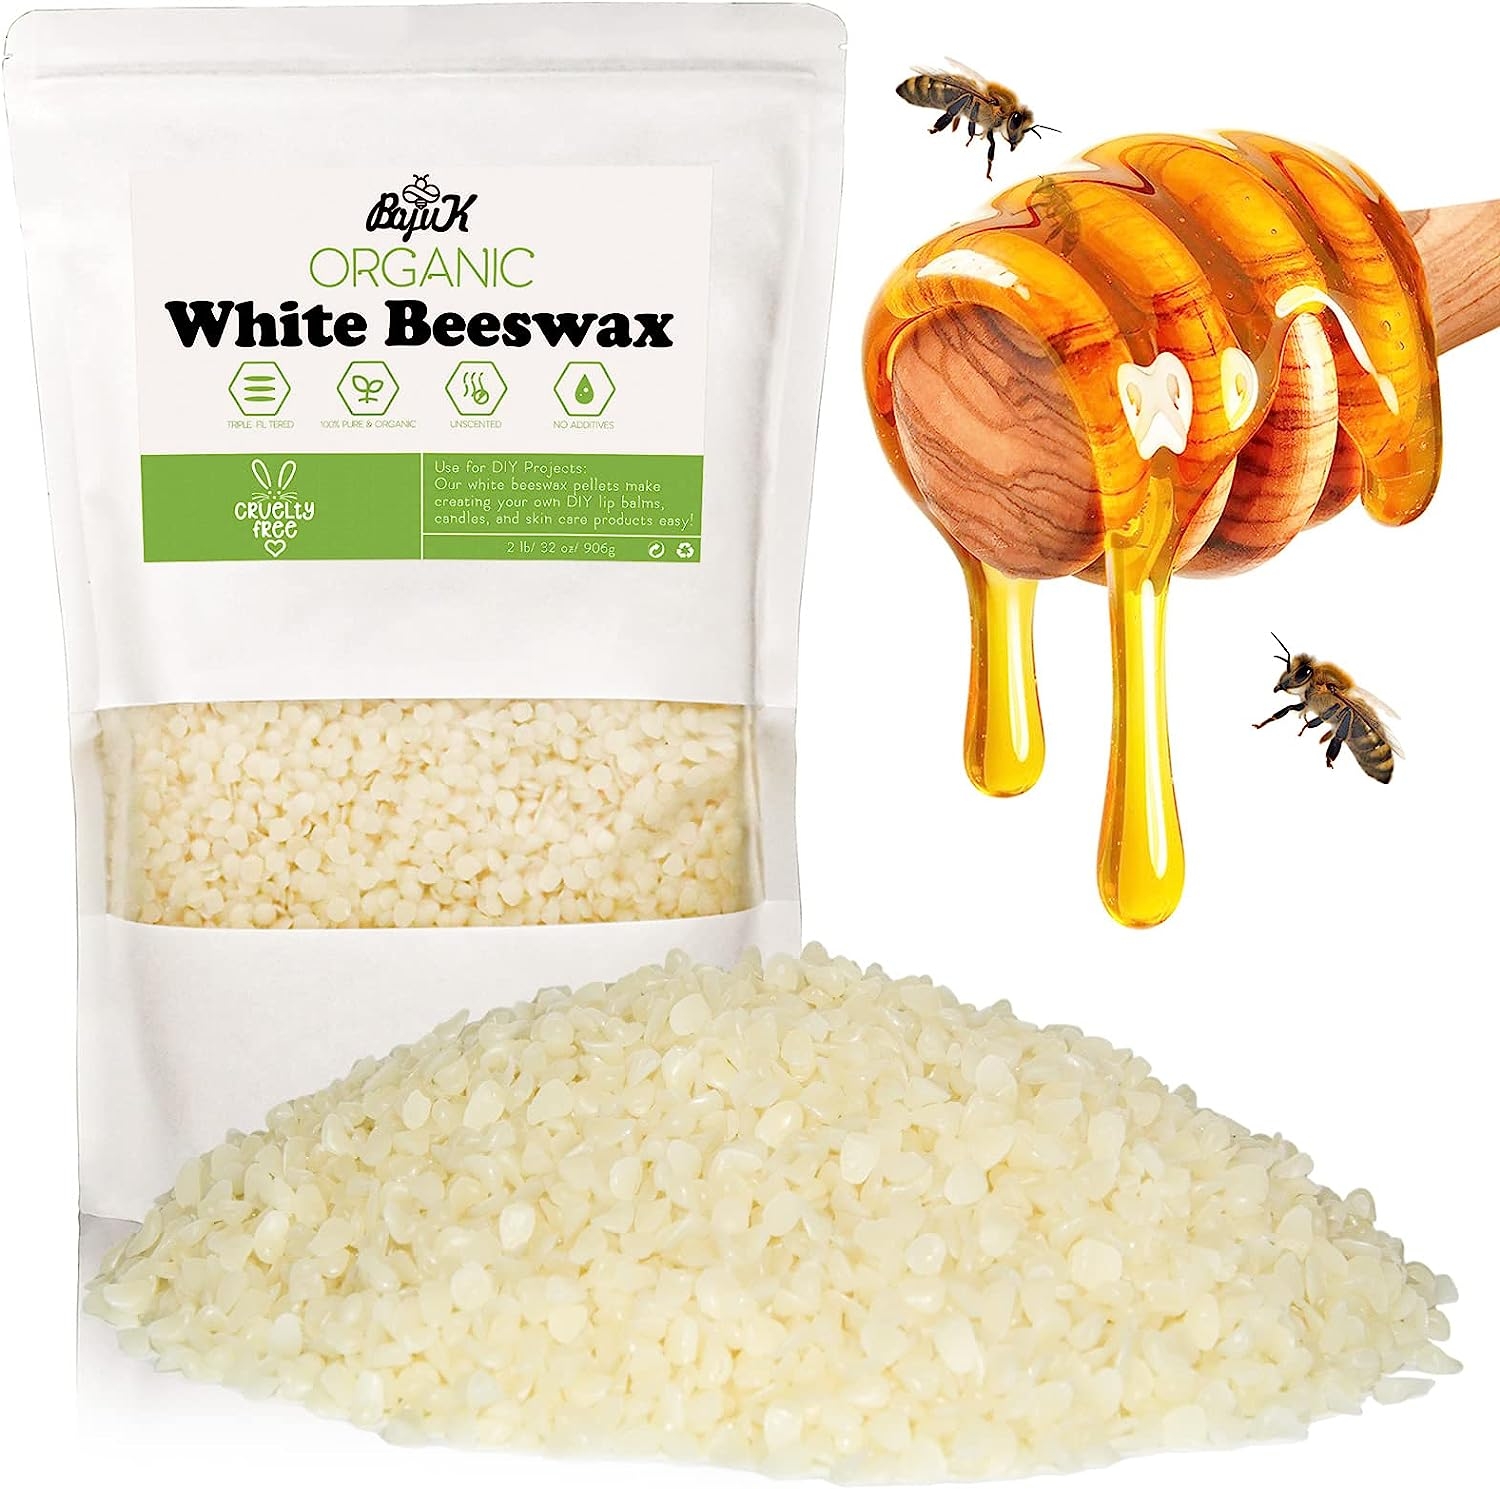 White Beeswax Pellets - 0.5Ib(200g) Beeswax for Candle Making